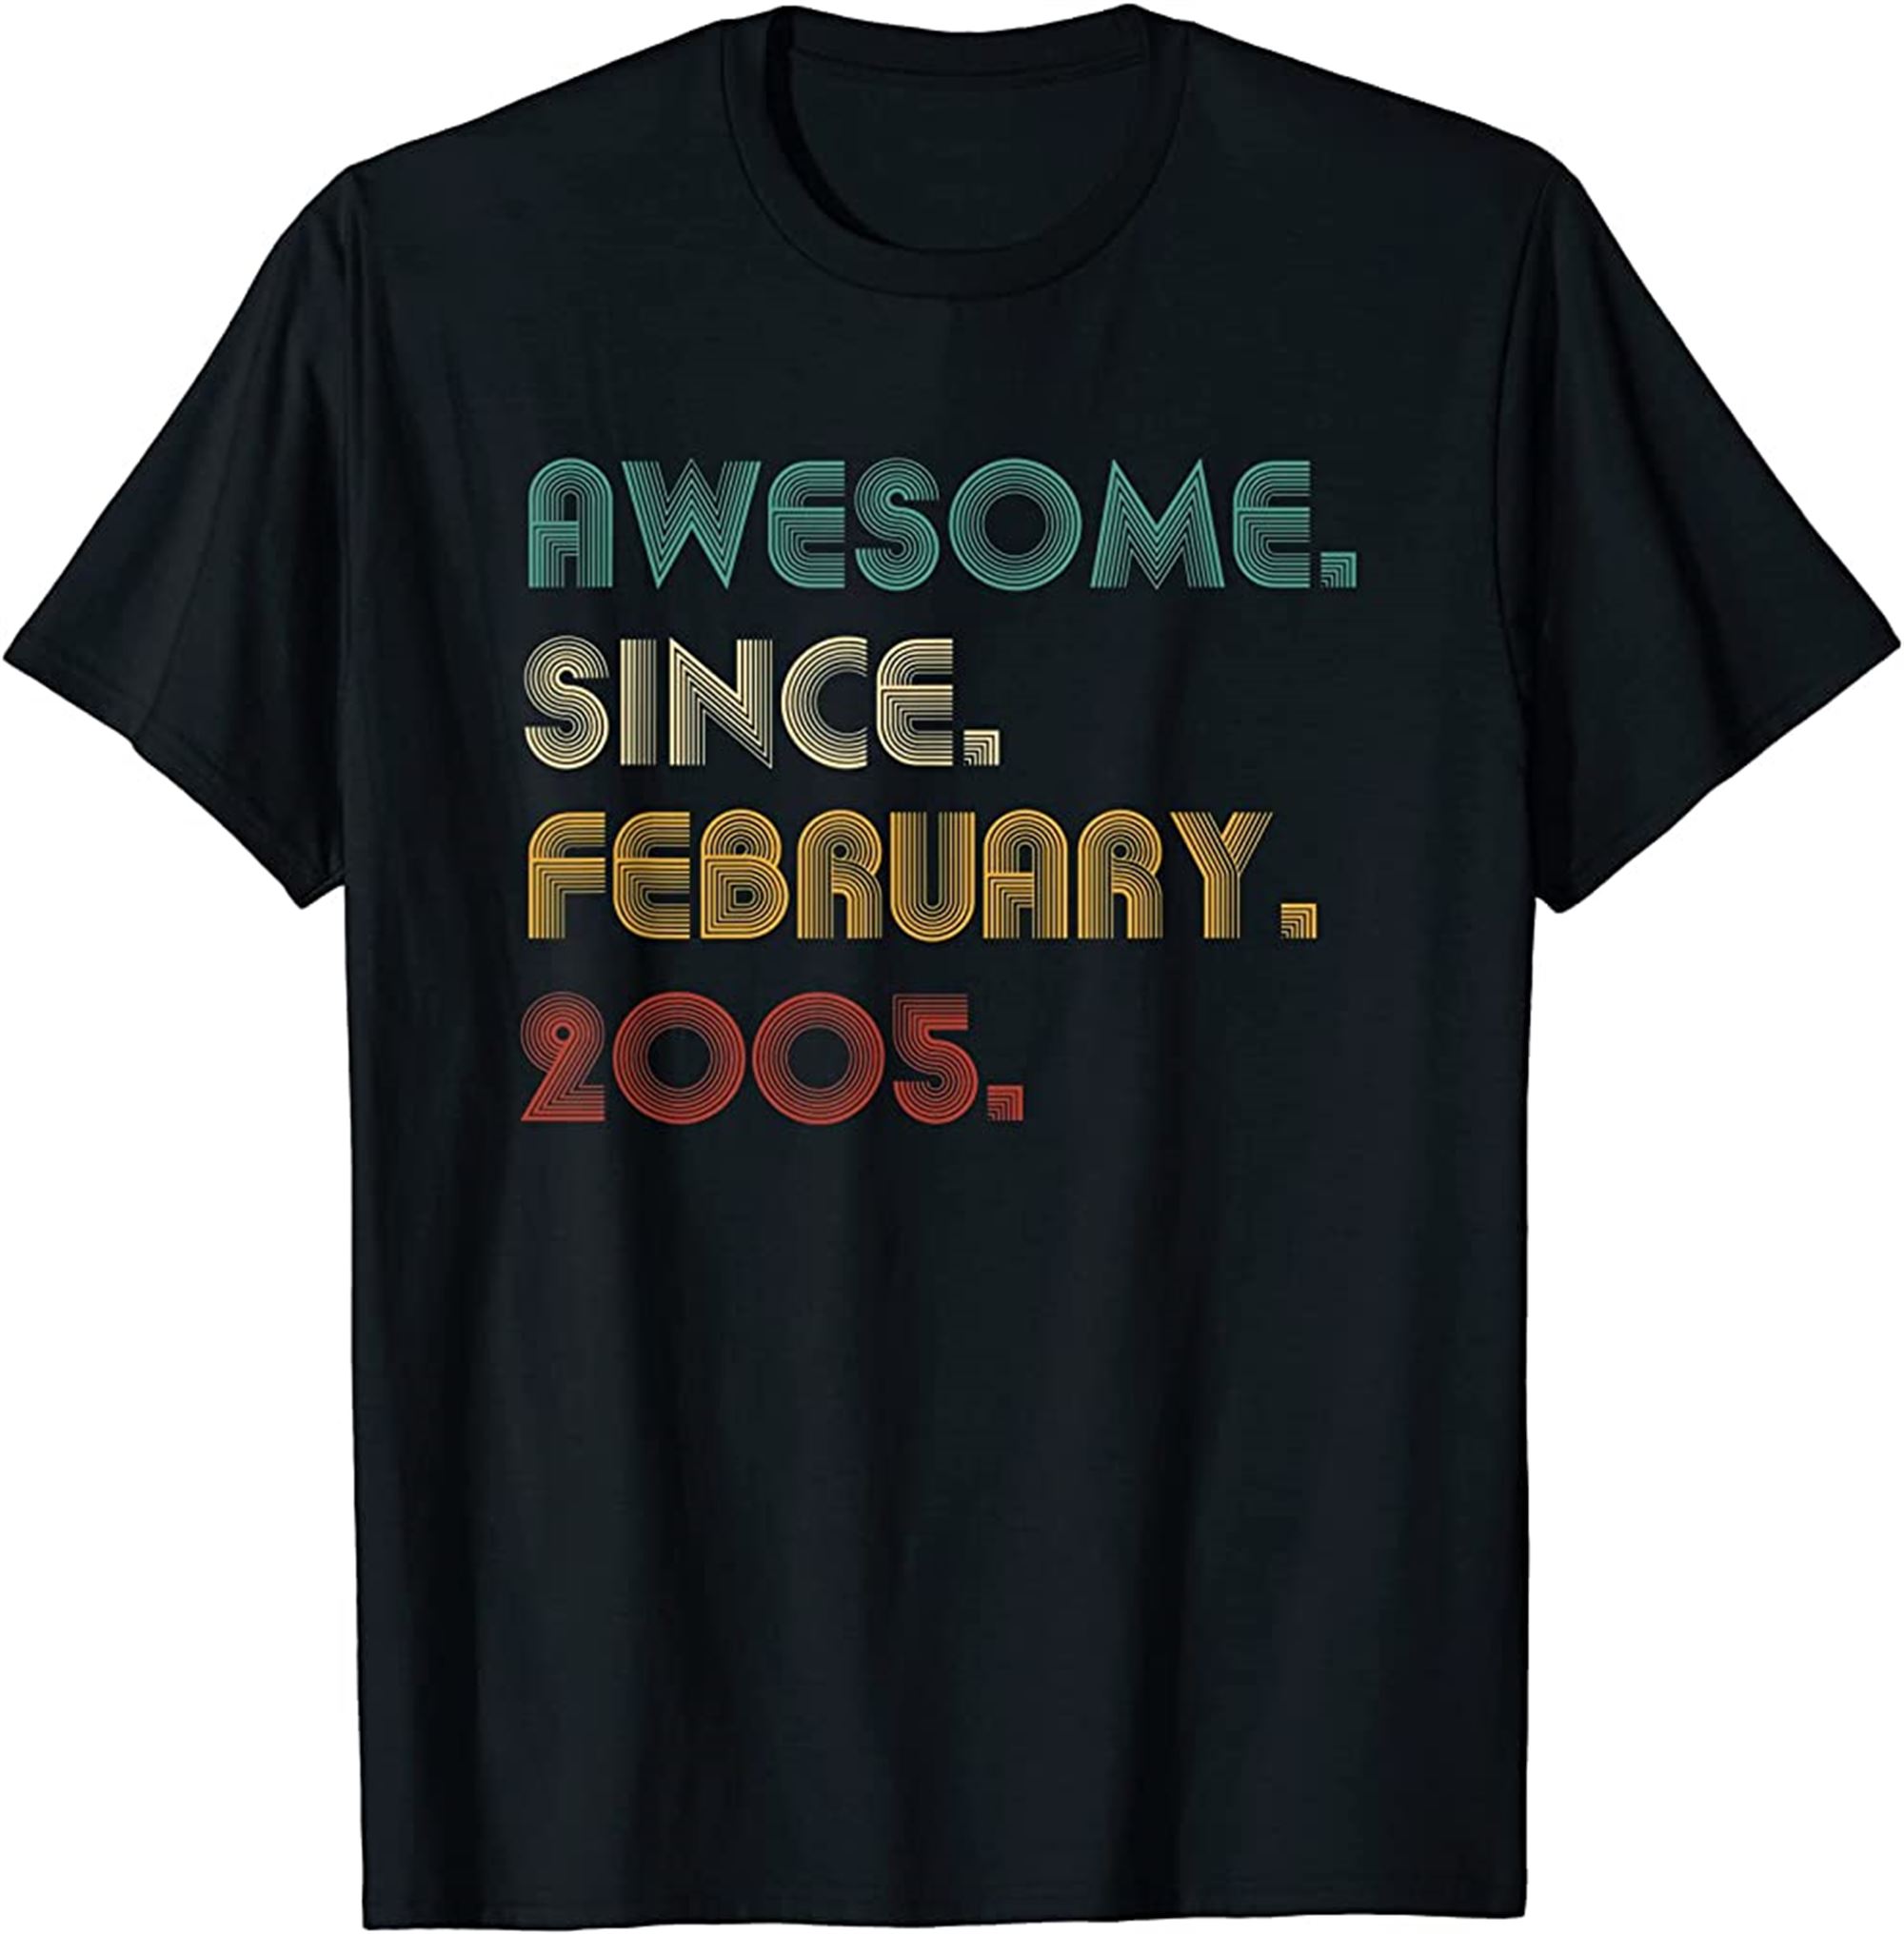 Awesome Since February 2005 17th Birthday 17 Year Old Gift T-shirt Full Size Up To 5xl